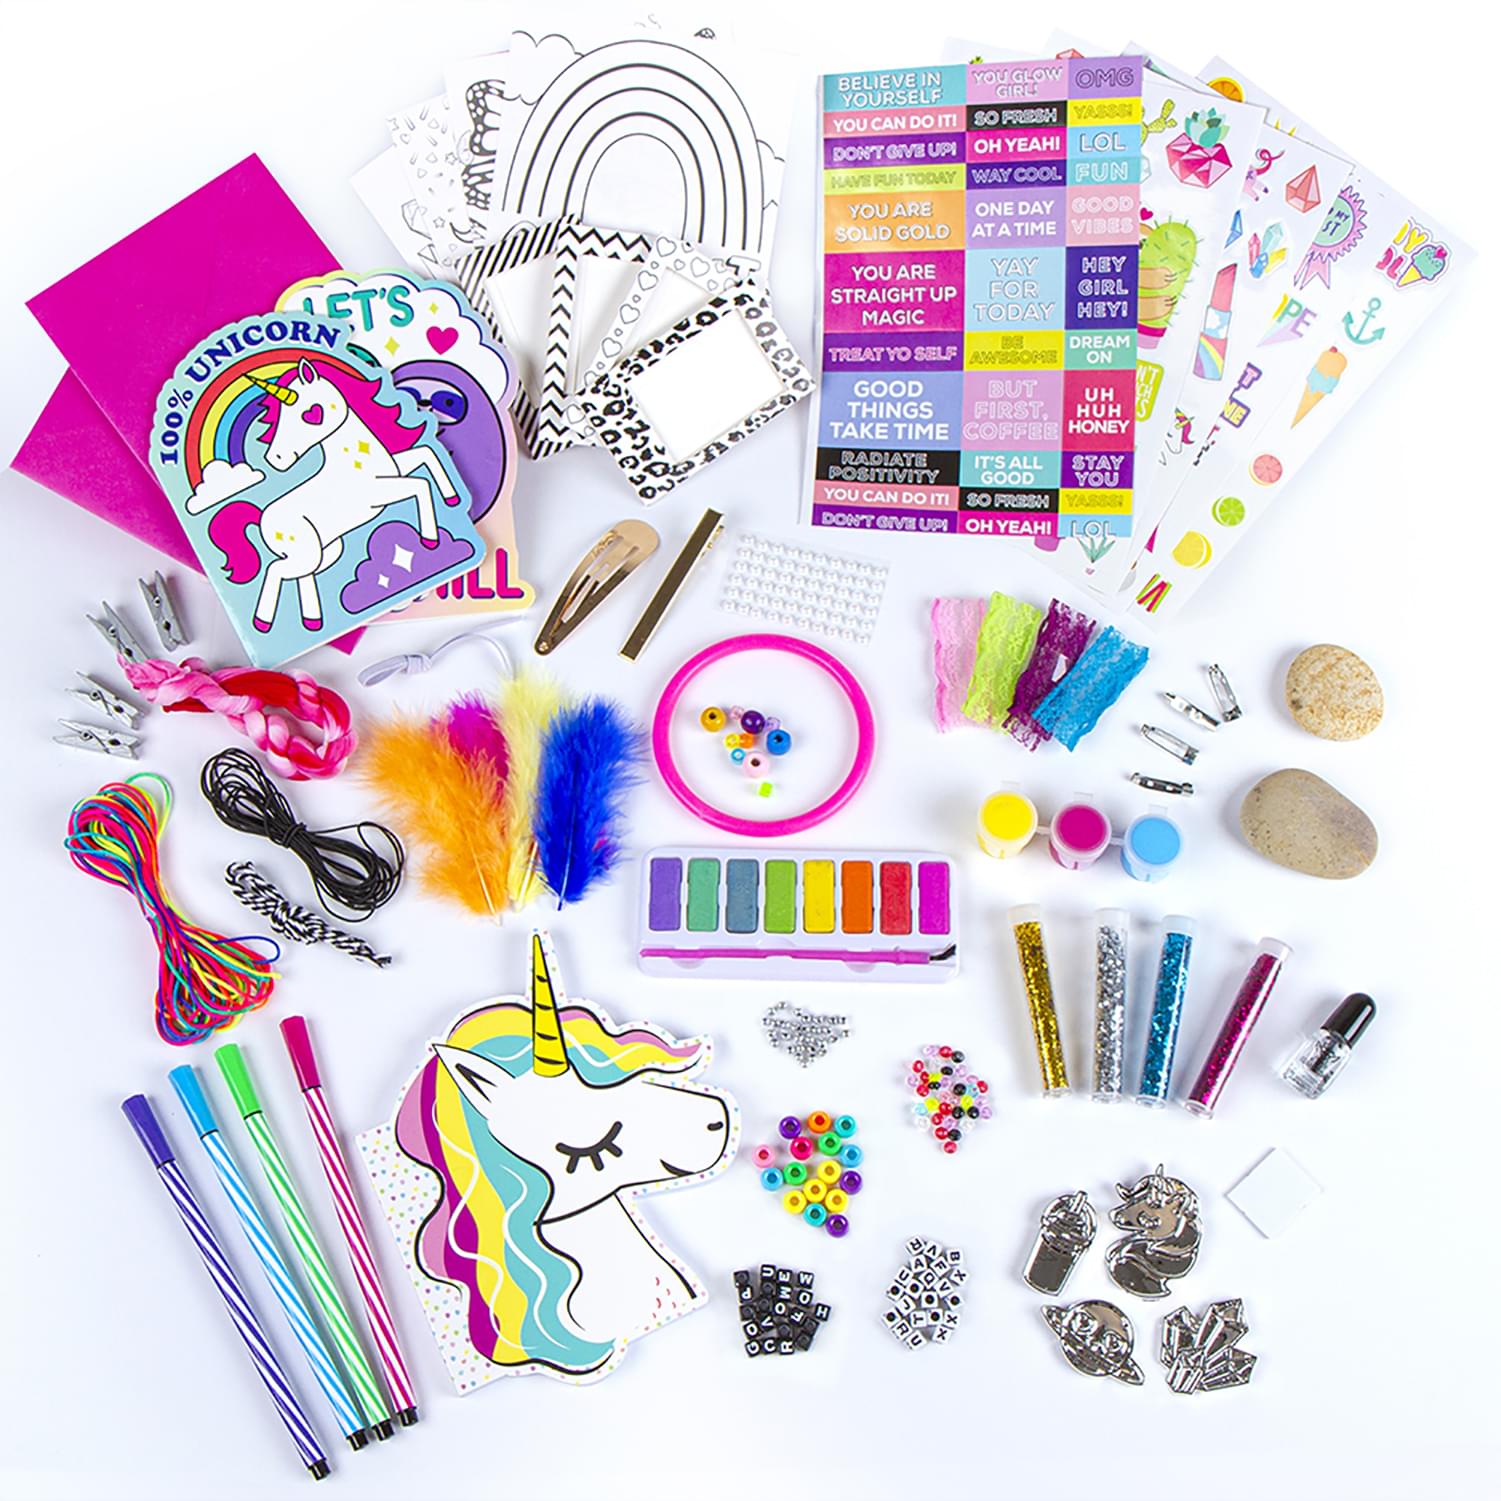 Fashion Angels Ultimate D.I.Y. Craft Box | 10 Projects